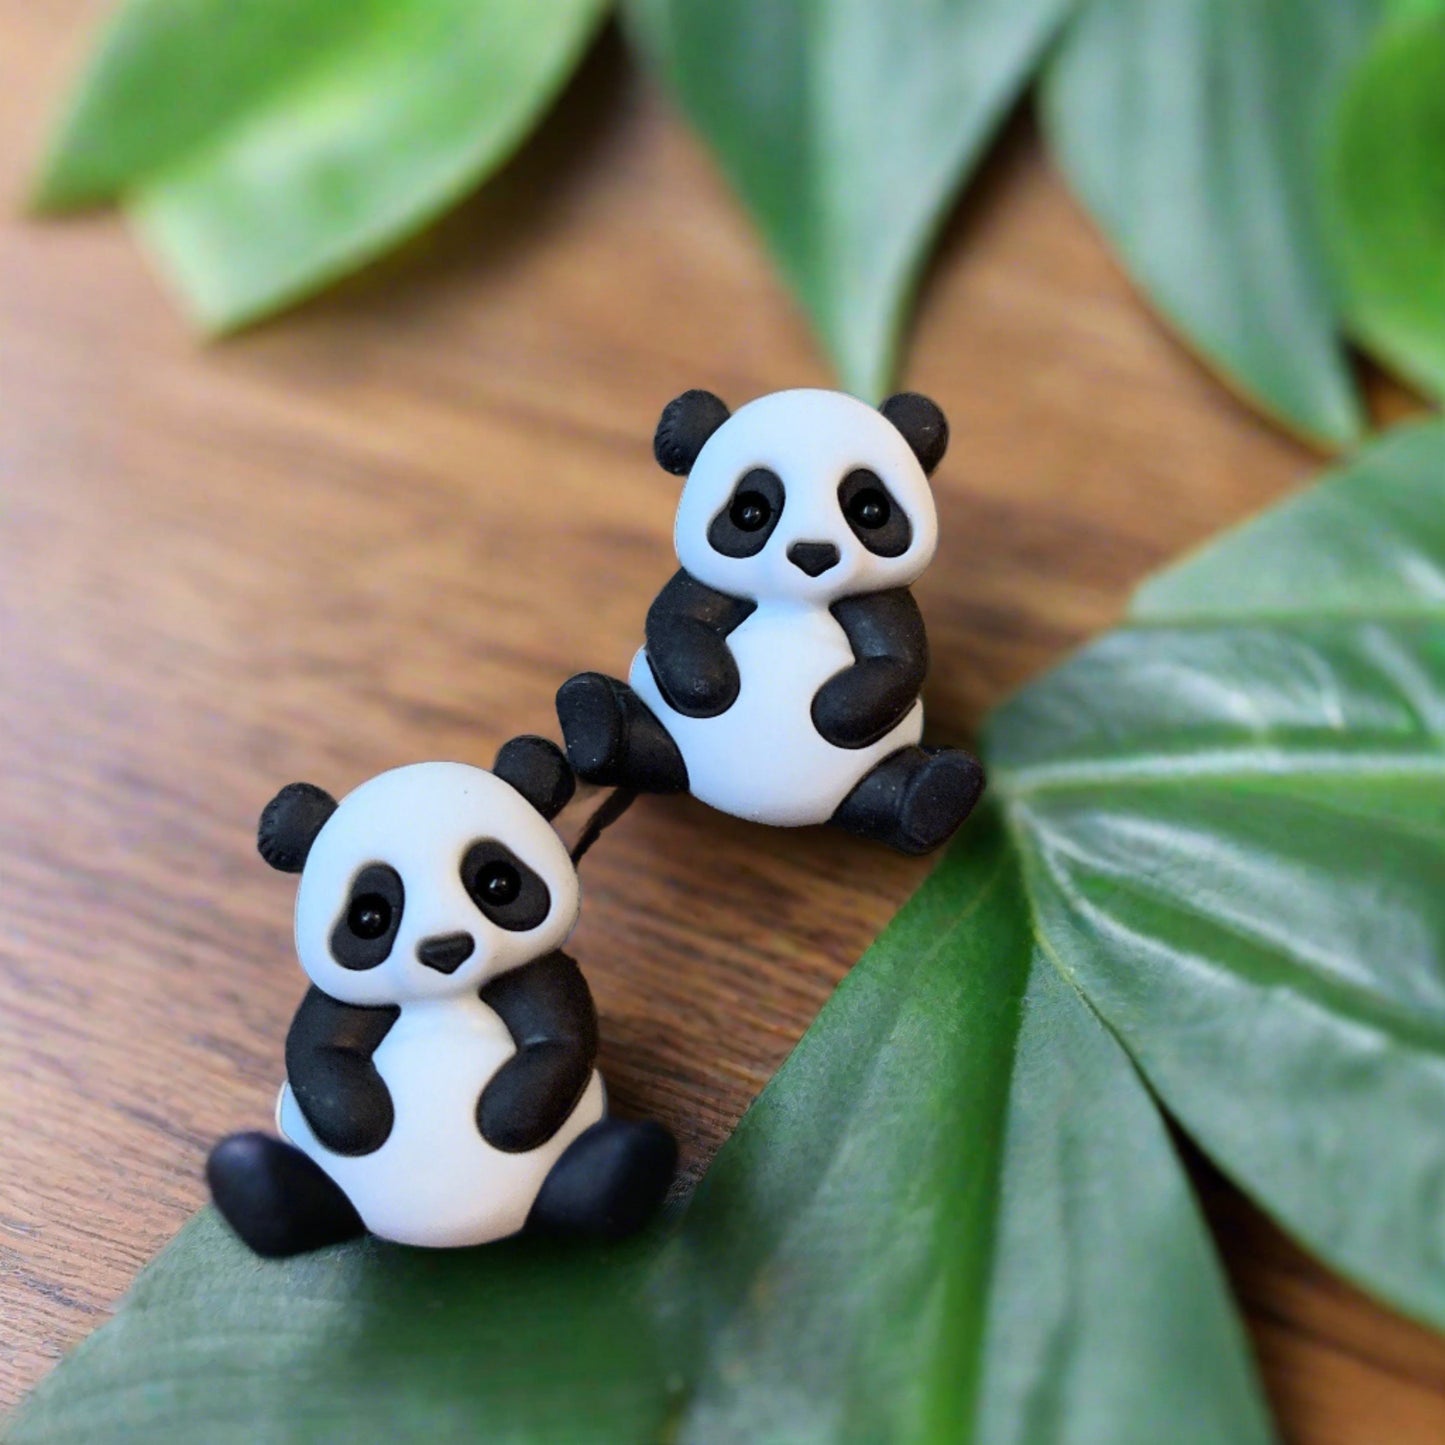 Unique and Adorable Panda sitting Earrings